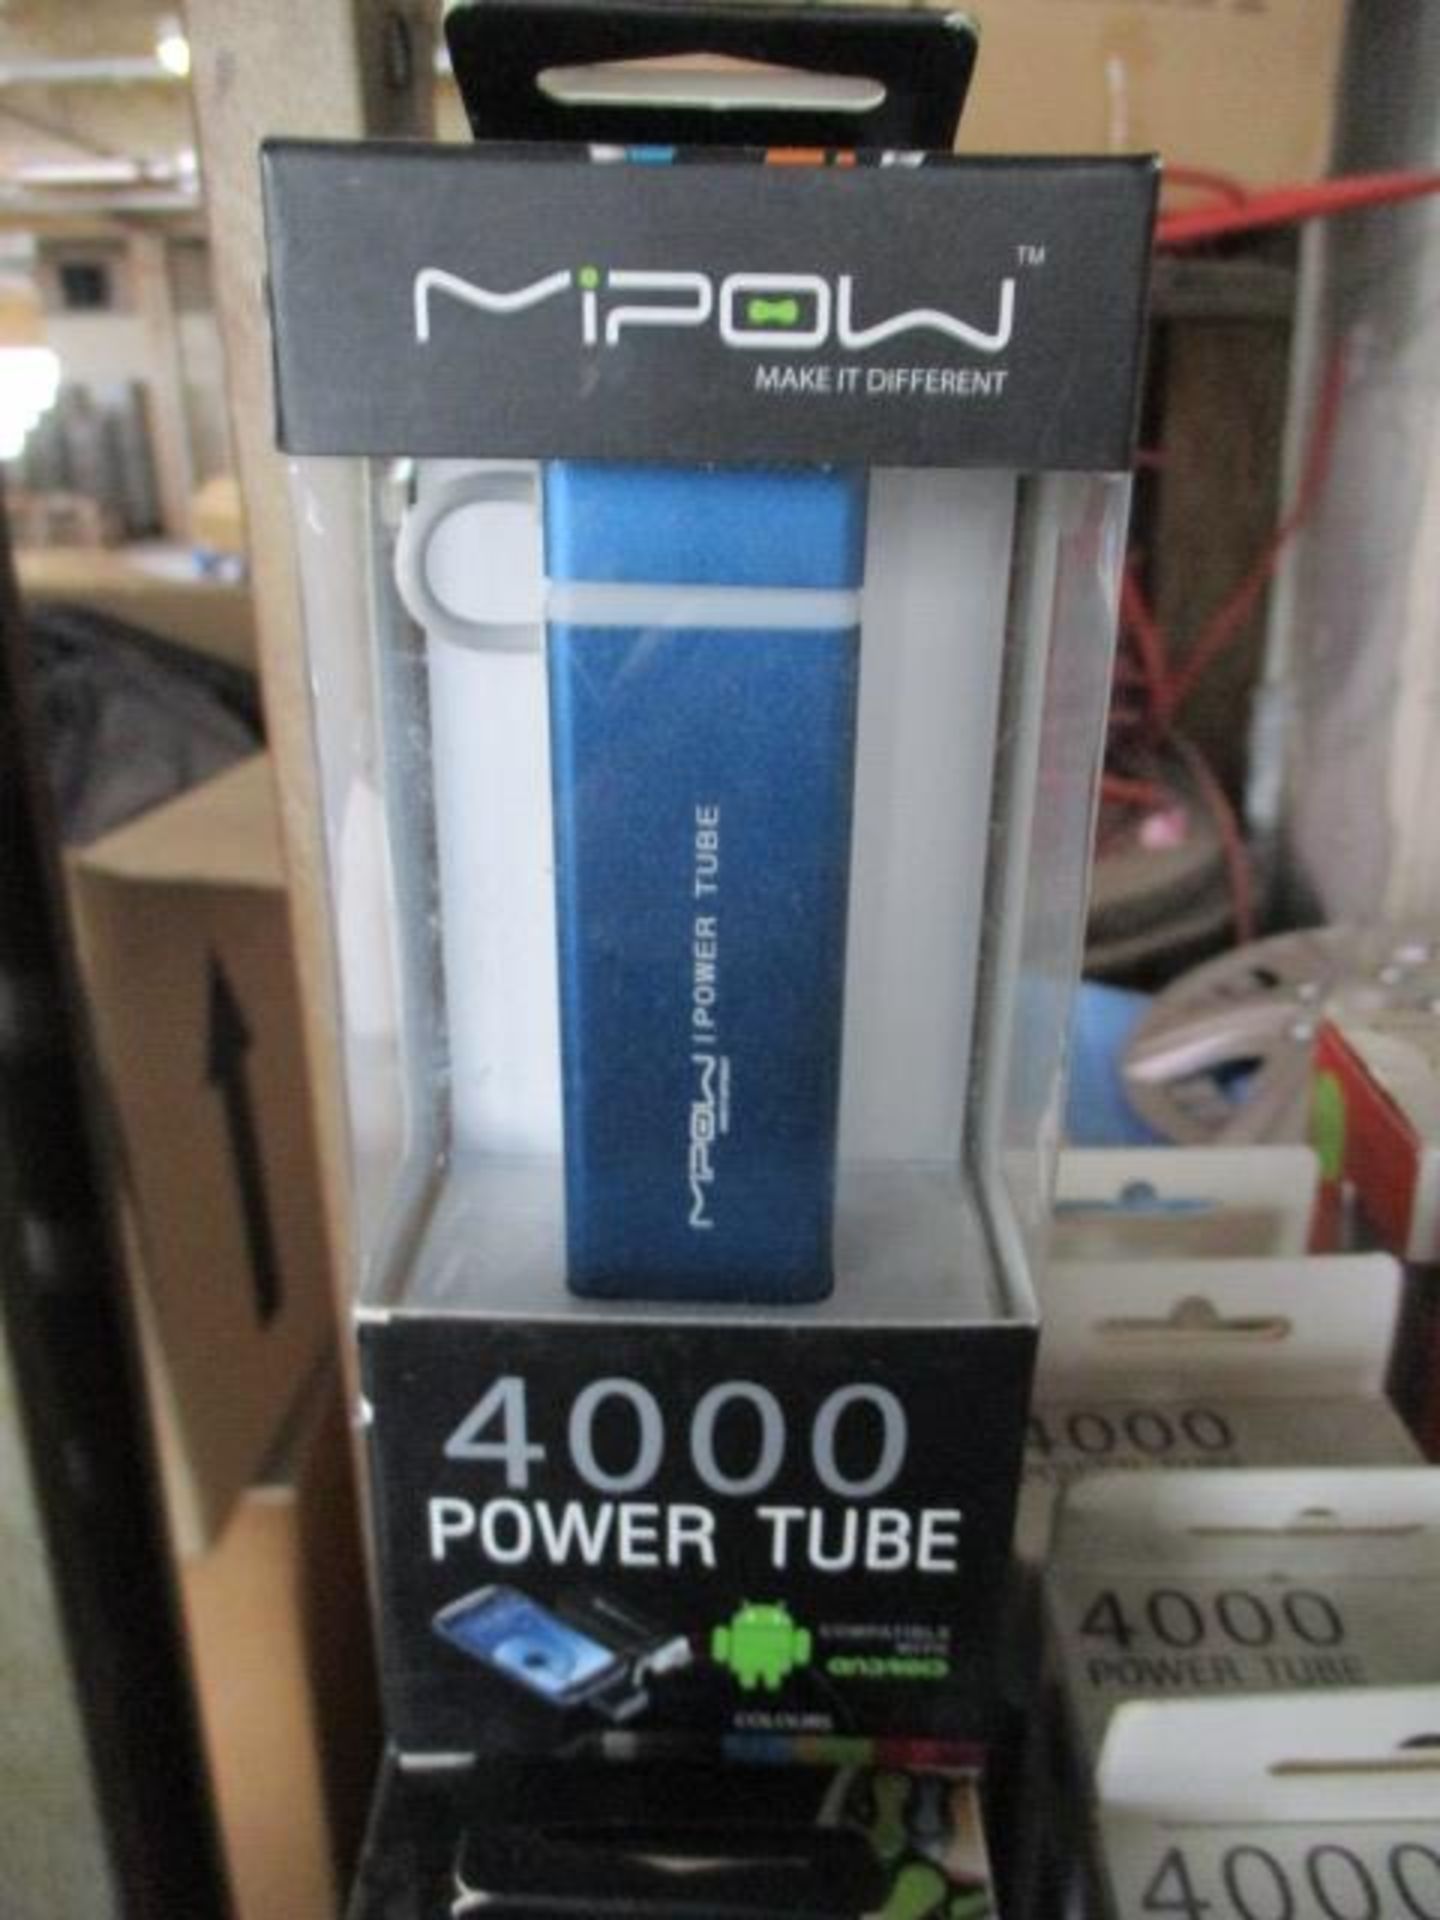 MiPow 4000Mah Power Tube recharger unit - Premium quality new and unused - rrp £49 + - comes comple